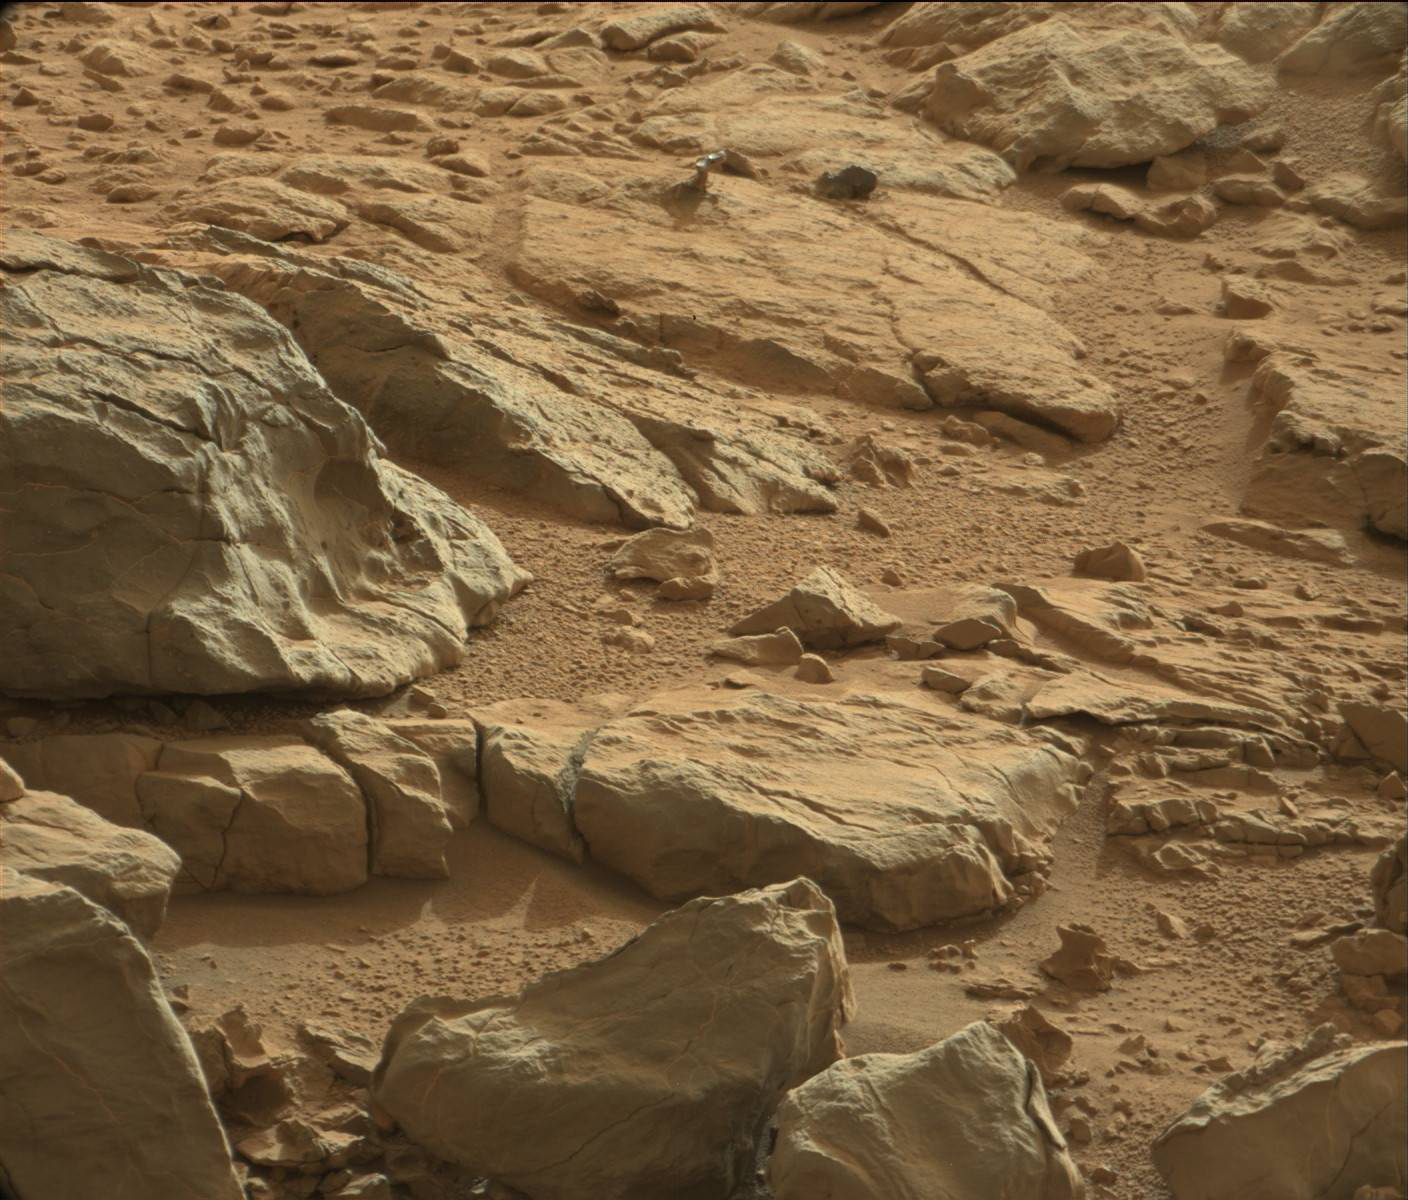 Looking Martian Rock Is Visible In This Image Taken By Nasa S Mars